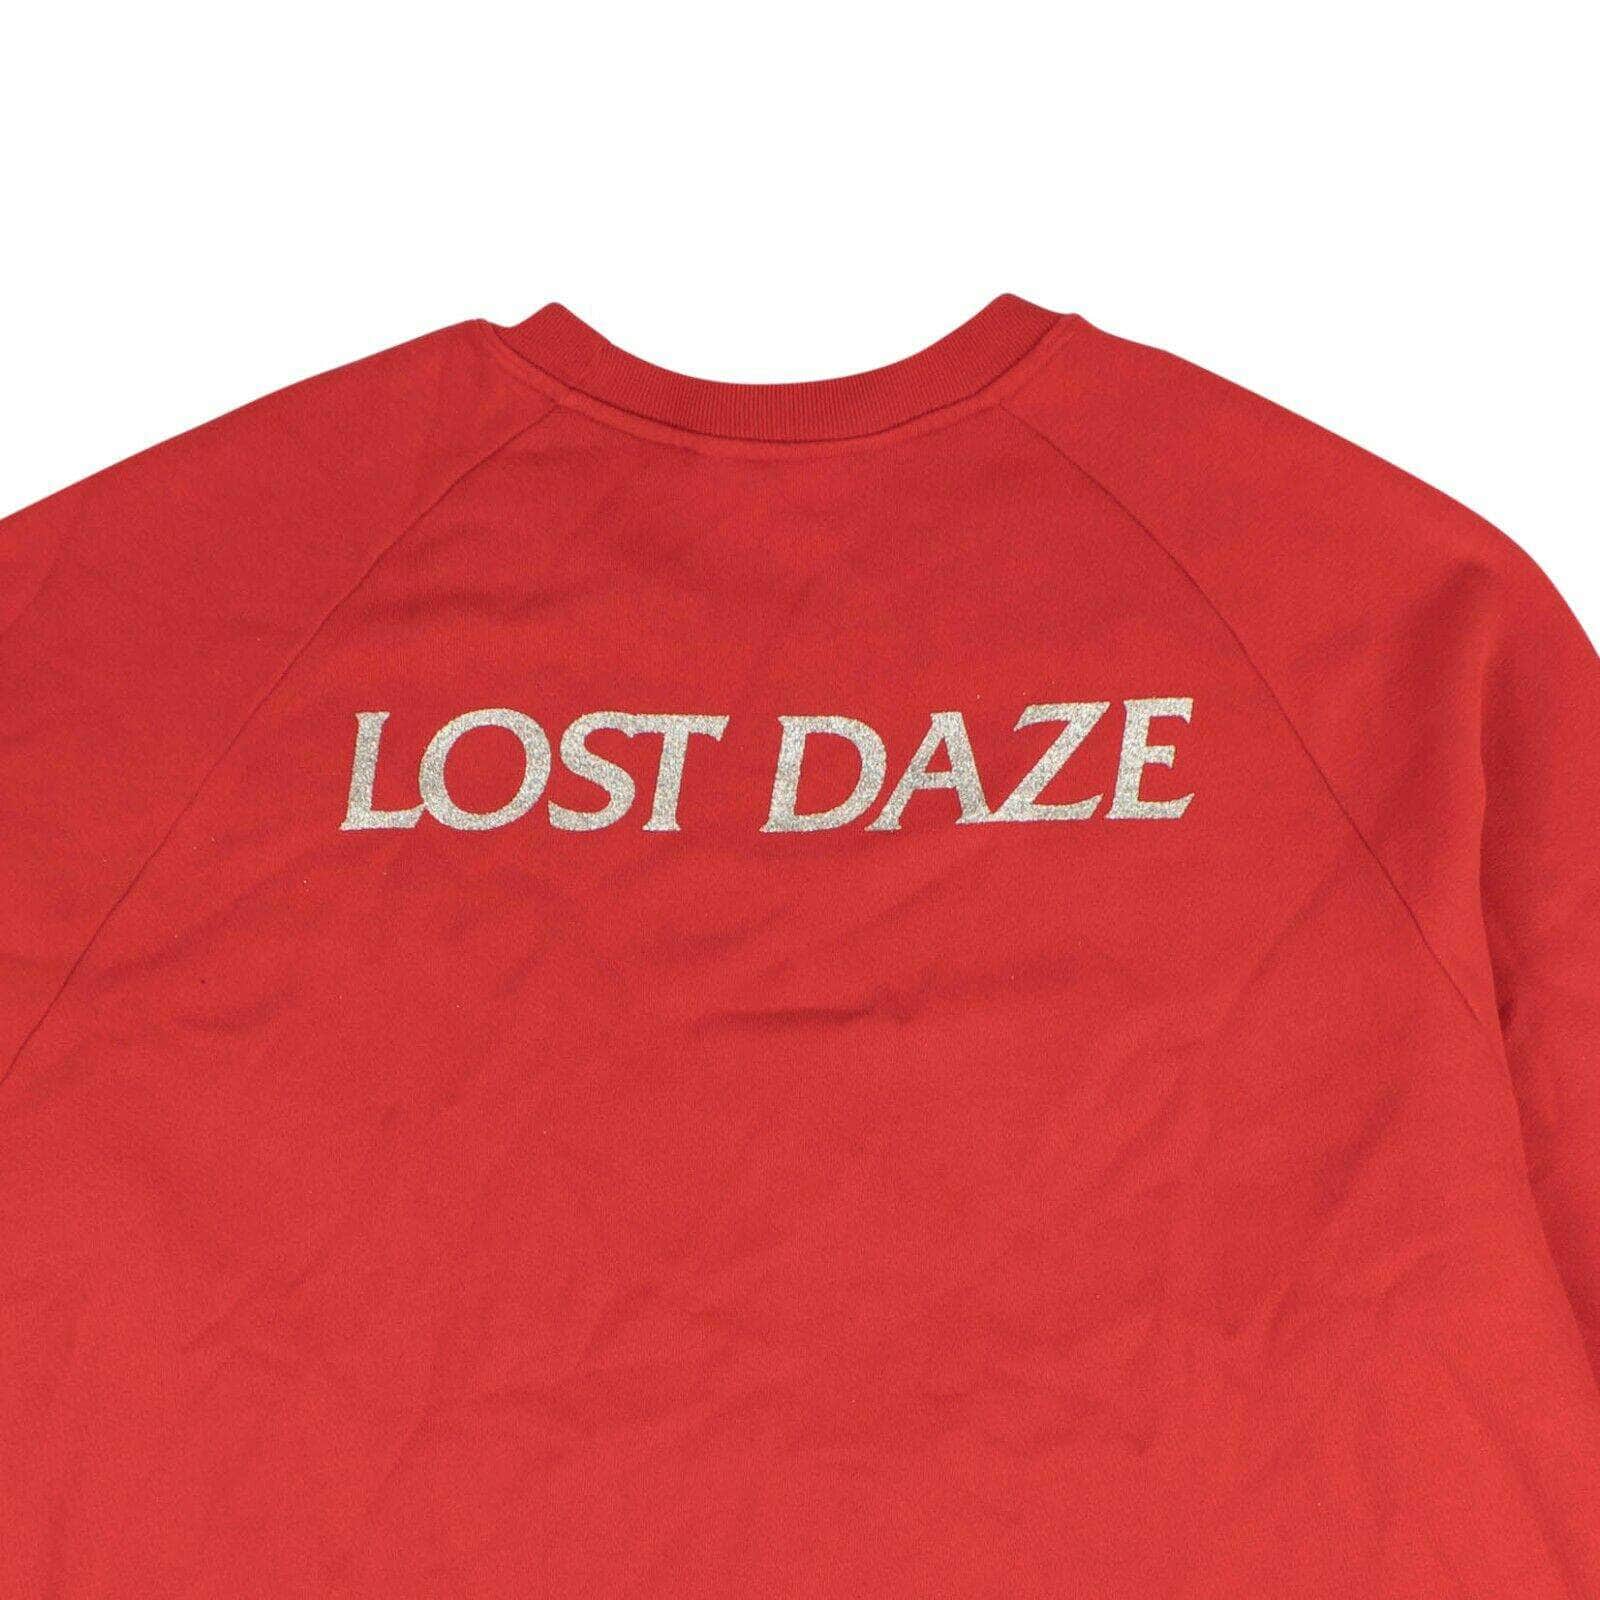 LOST DAZE channelenable-all, chicmi, couponcollection, gender-mens, lost-daze, main-clothing, mens-crewnecks, mens-shoes, size-l, size-xl, under-250 Red And Blue Time Crew Pullover Sweatshirt